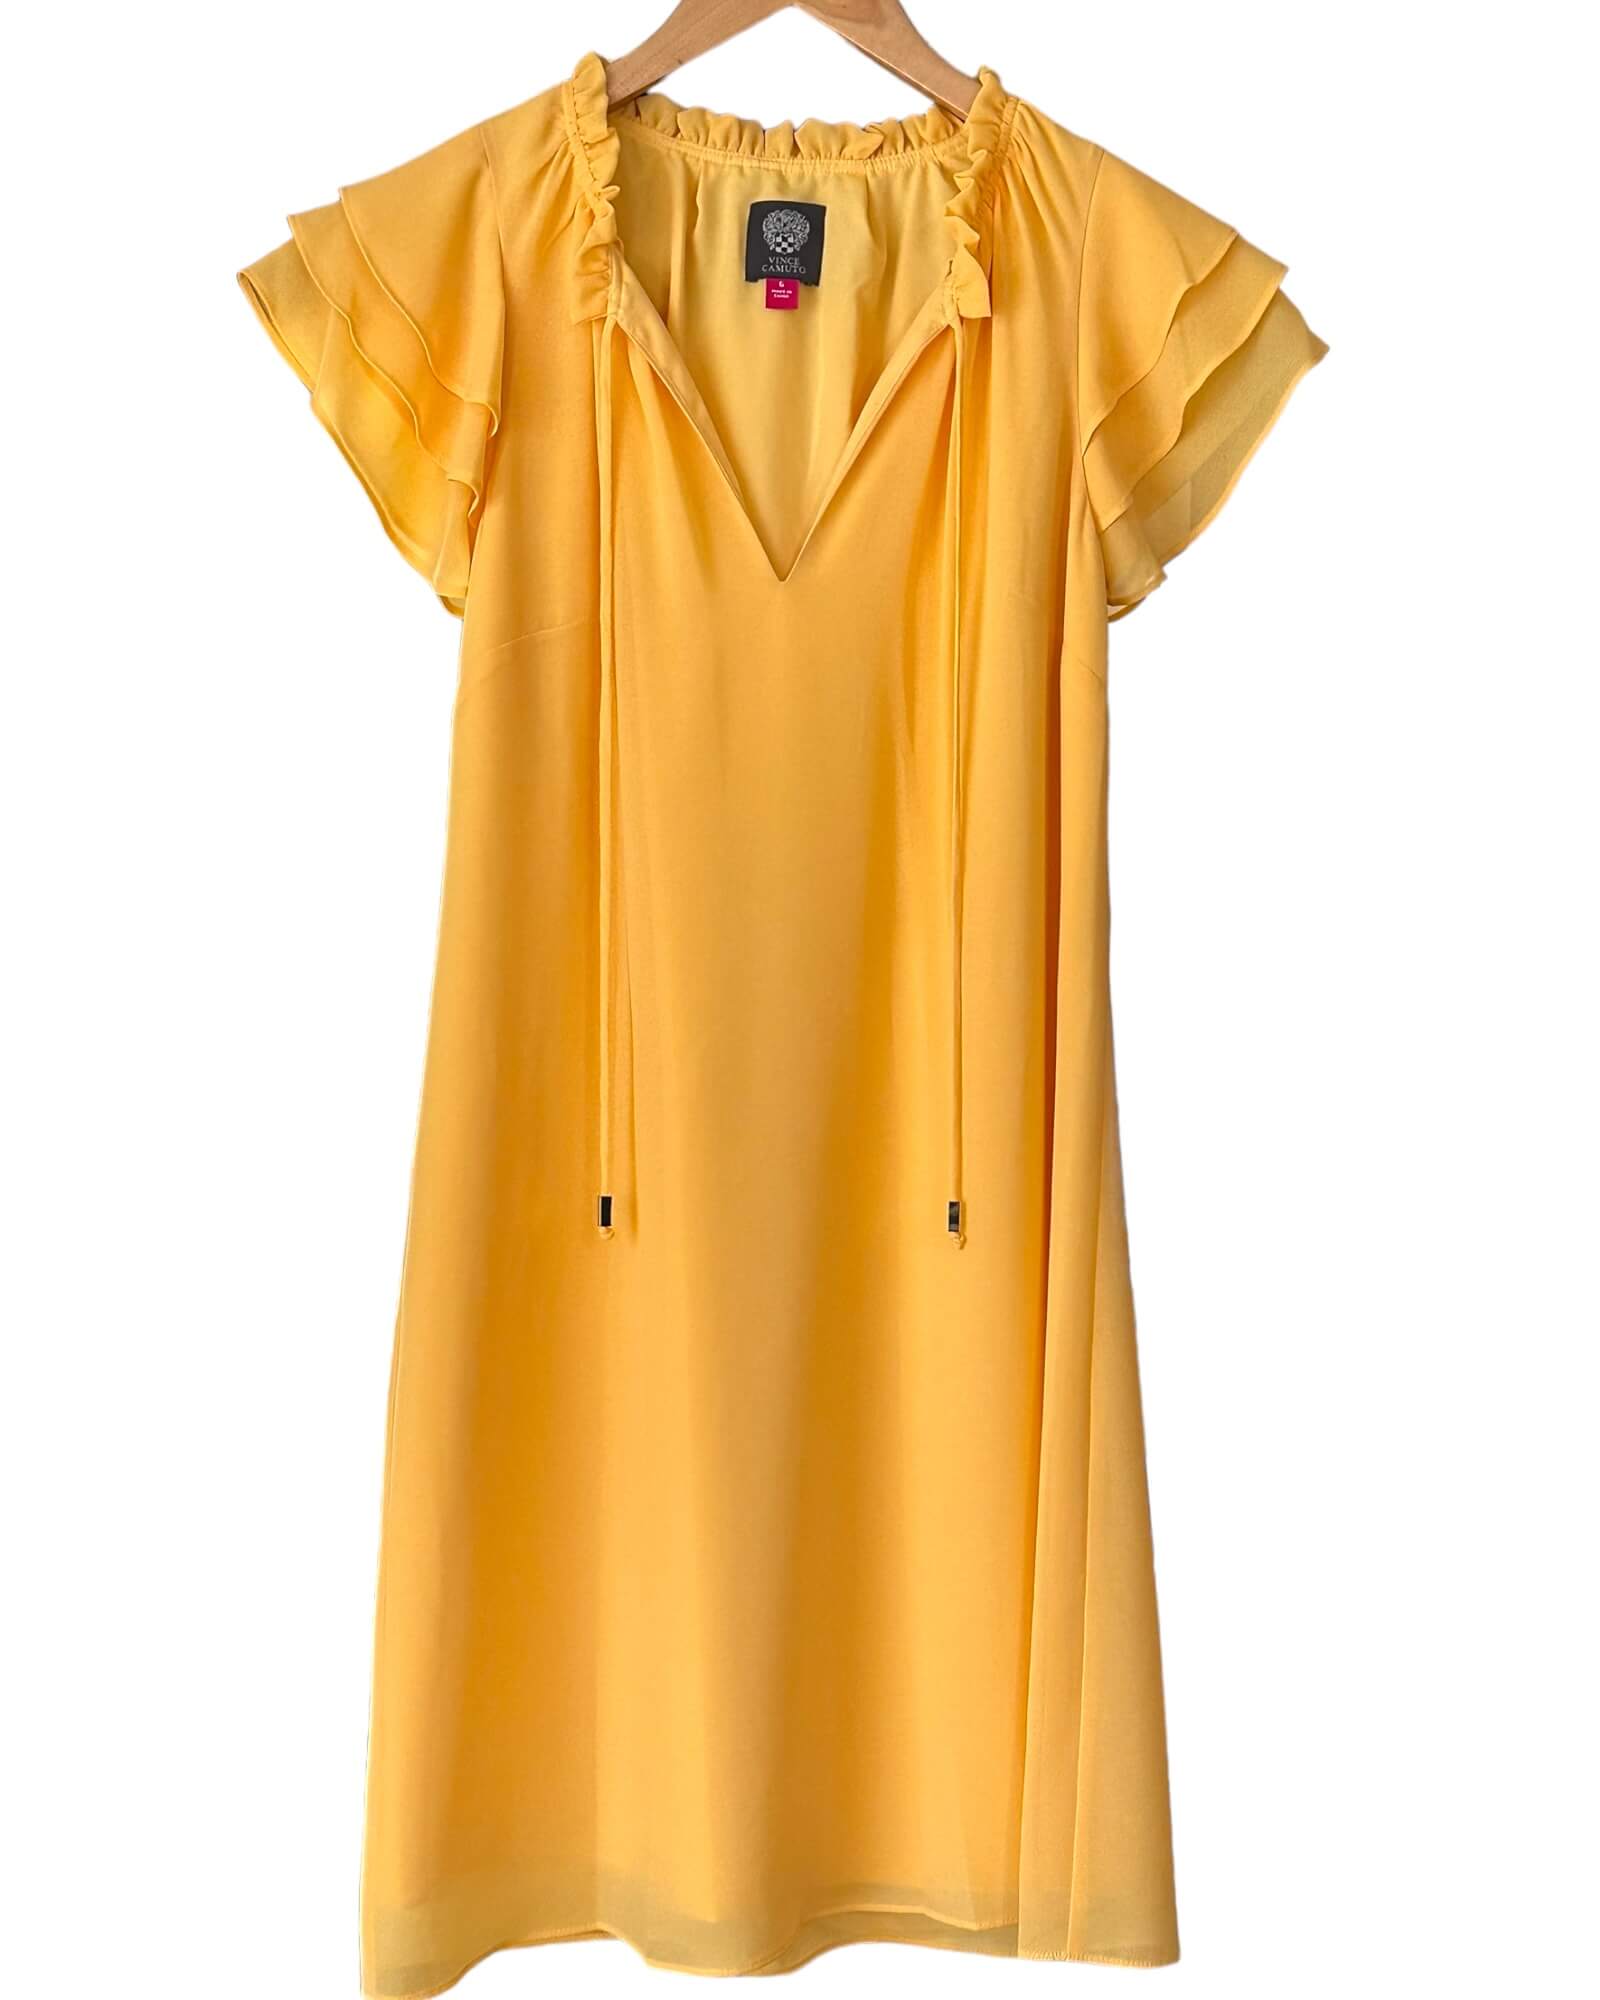 Bright Spring VINCE CAMUTO apricot yellow tie front ruffle sleeve dress